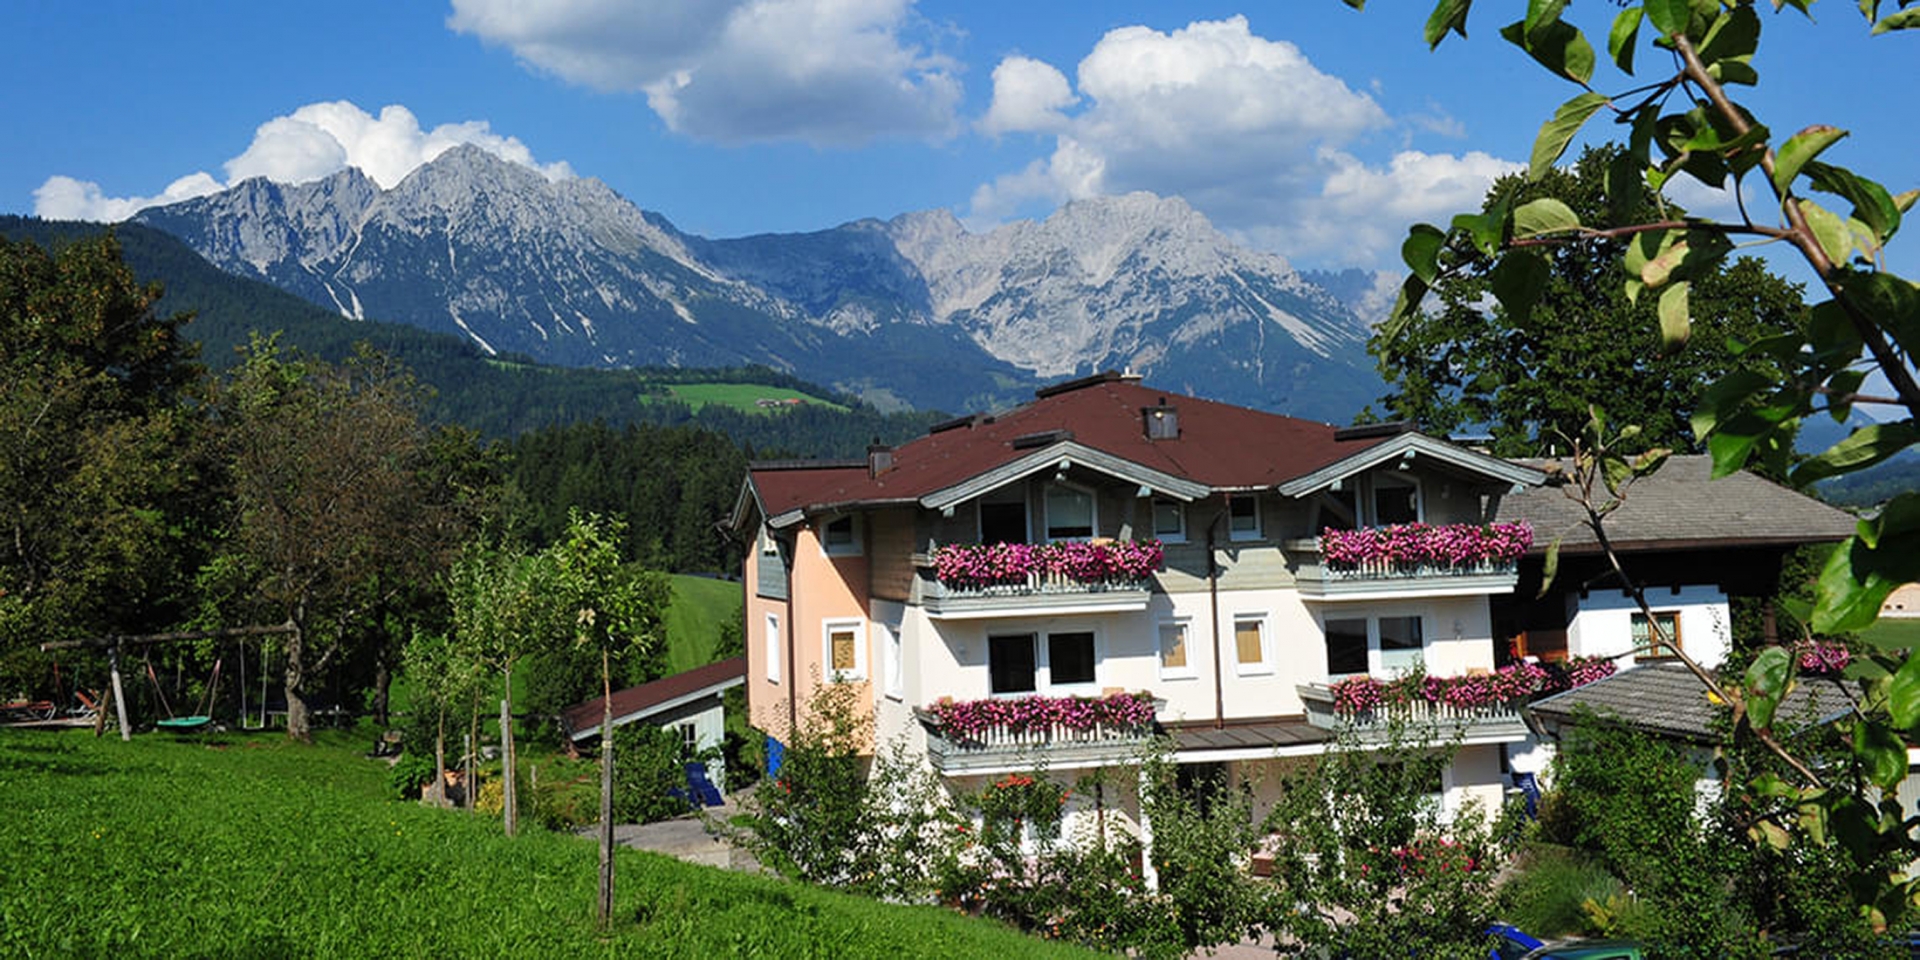 Bed & Breakfast Landhaus Strasser <br/>96.00 ew <br/> <a href='http://vakantieoplossing.nl/outpage/?id=5ca67ca141b74e1edb10eed82b3f5381' target='_blank'>View Details</a>